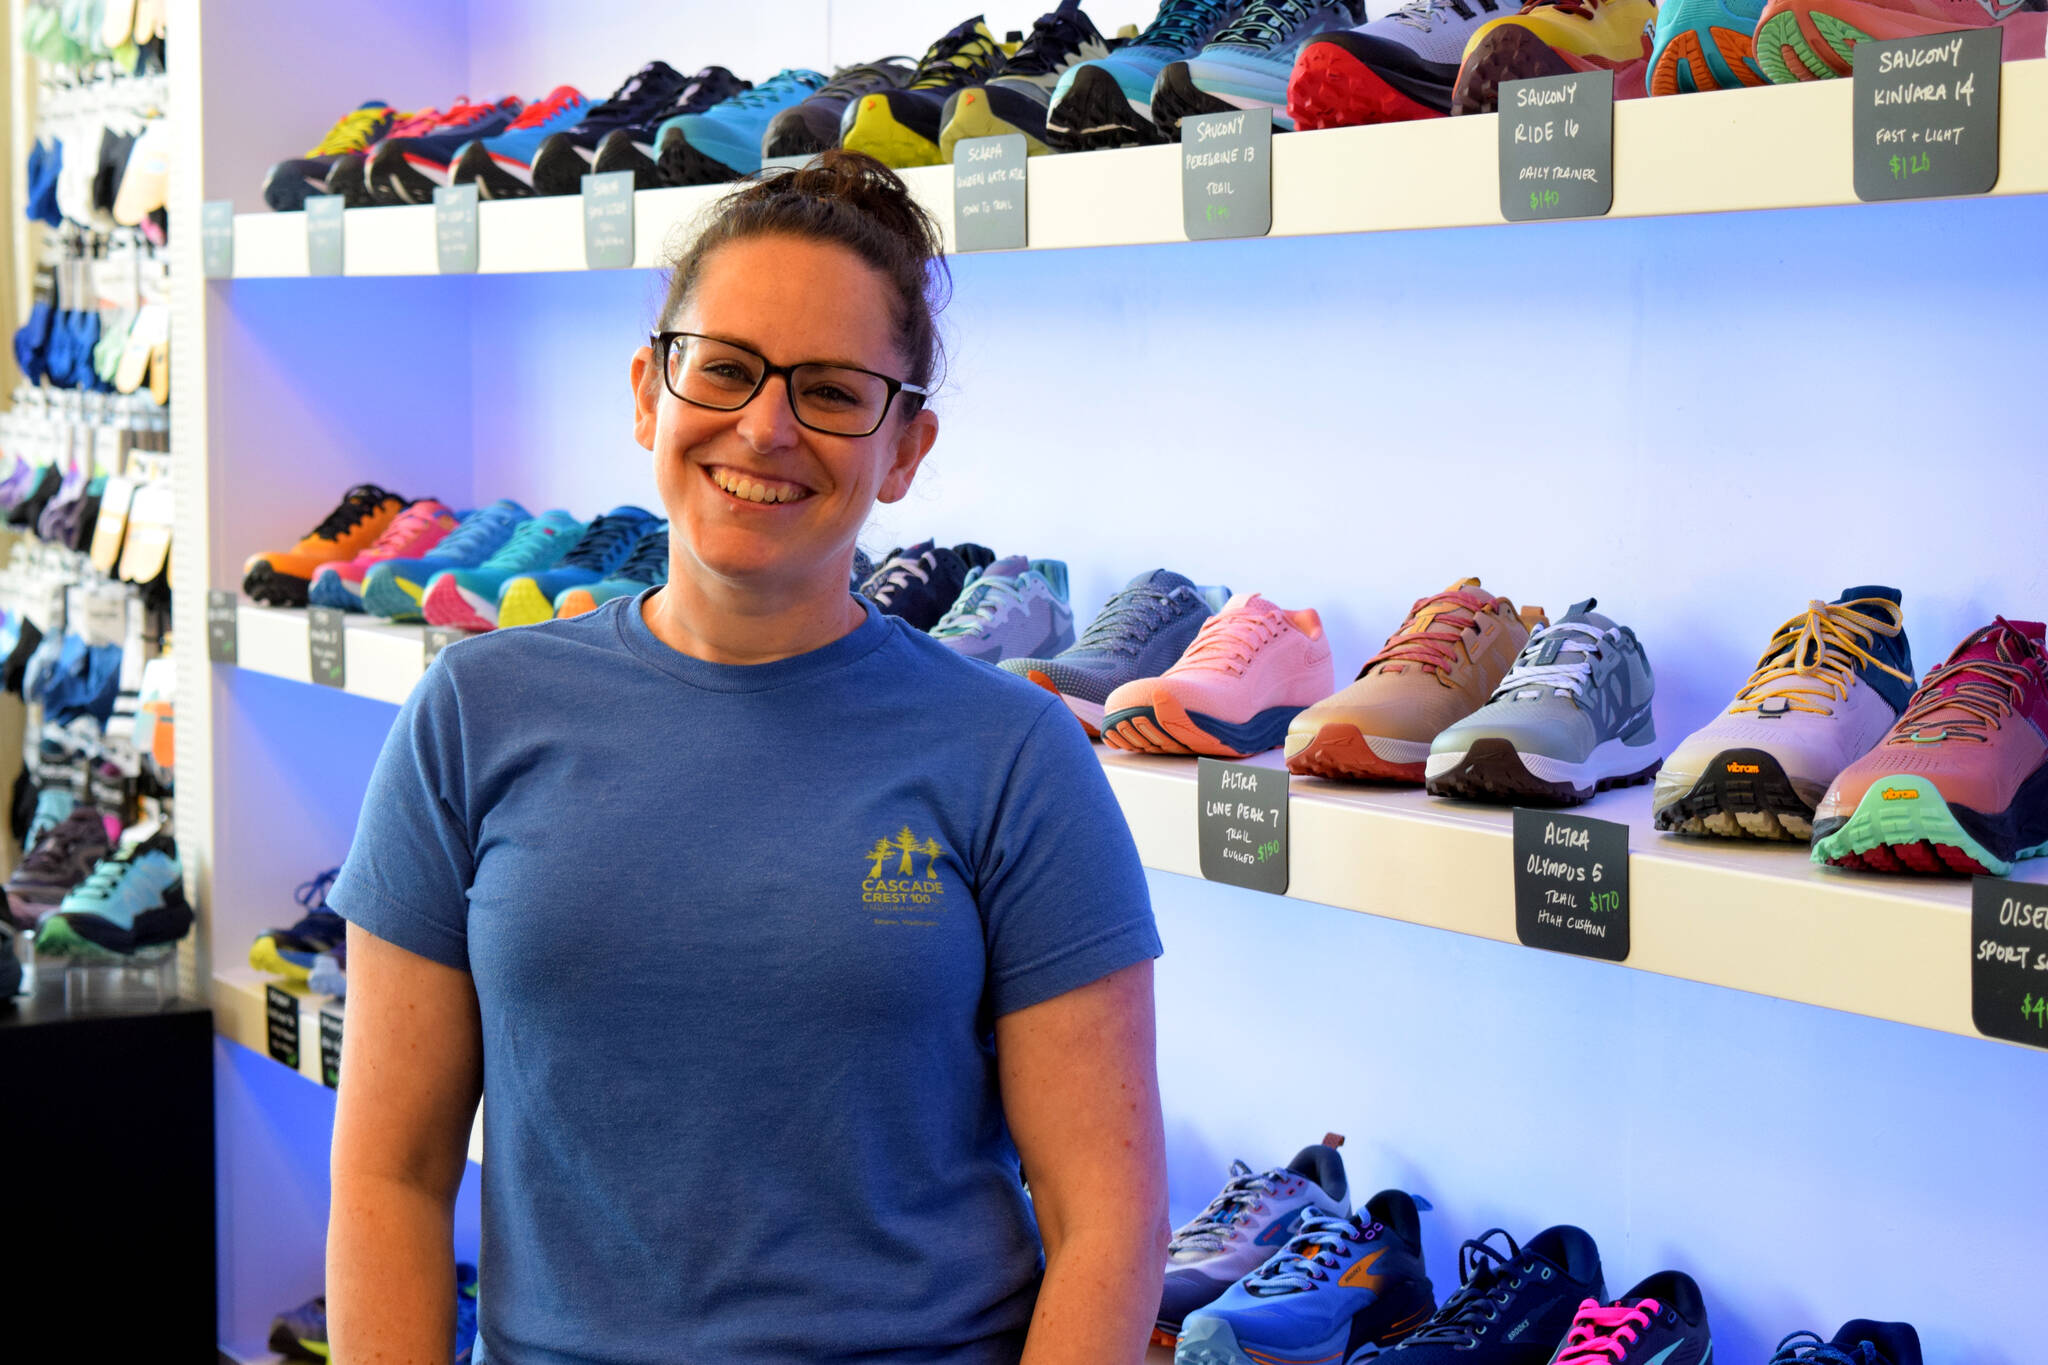 Photo by Conor Wilson/Valley Record.
Taryn Graham, owner of Snoqualmie Running.